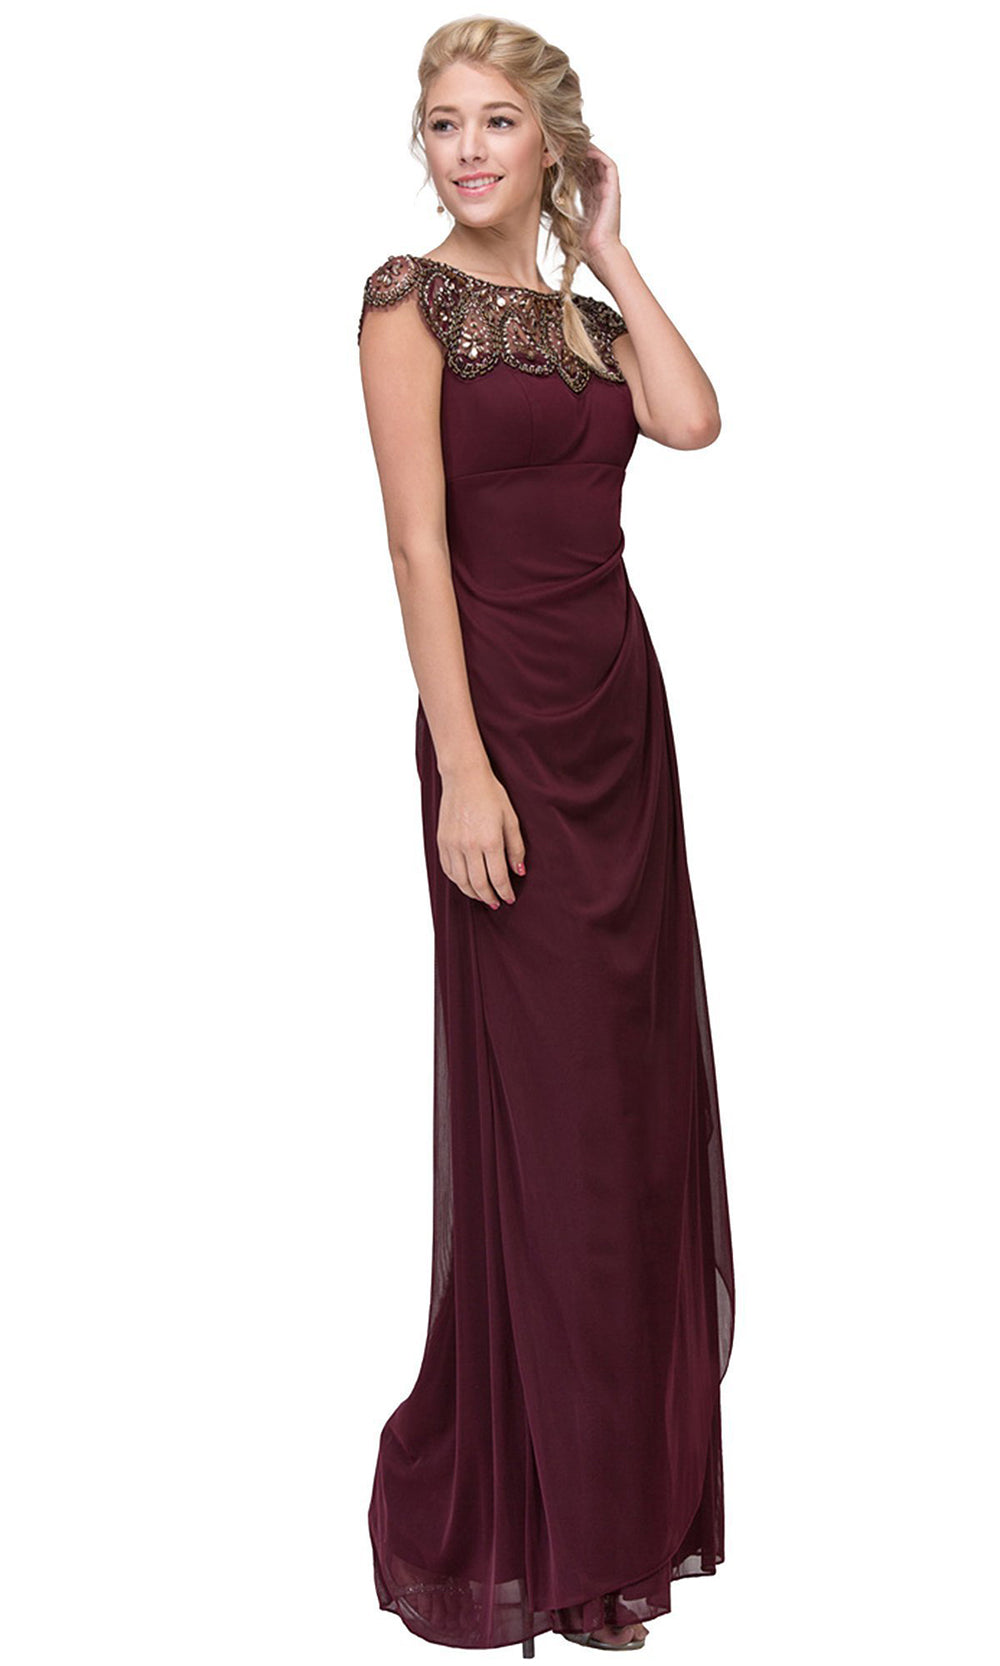 Eureka Fashion - Beaded Illusion Bateau Sheath Dress R216SC - 1 pc Red In Size XS and S Available CCSALE S / Red